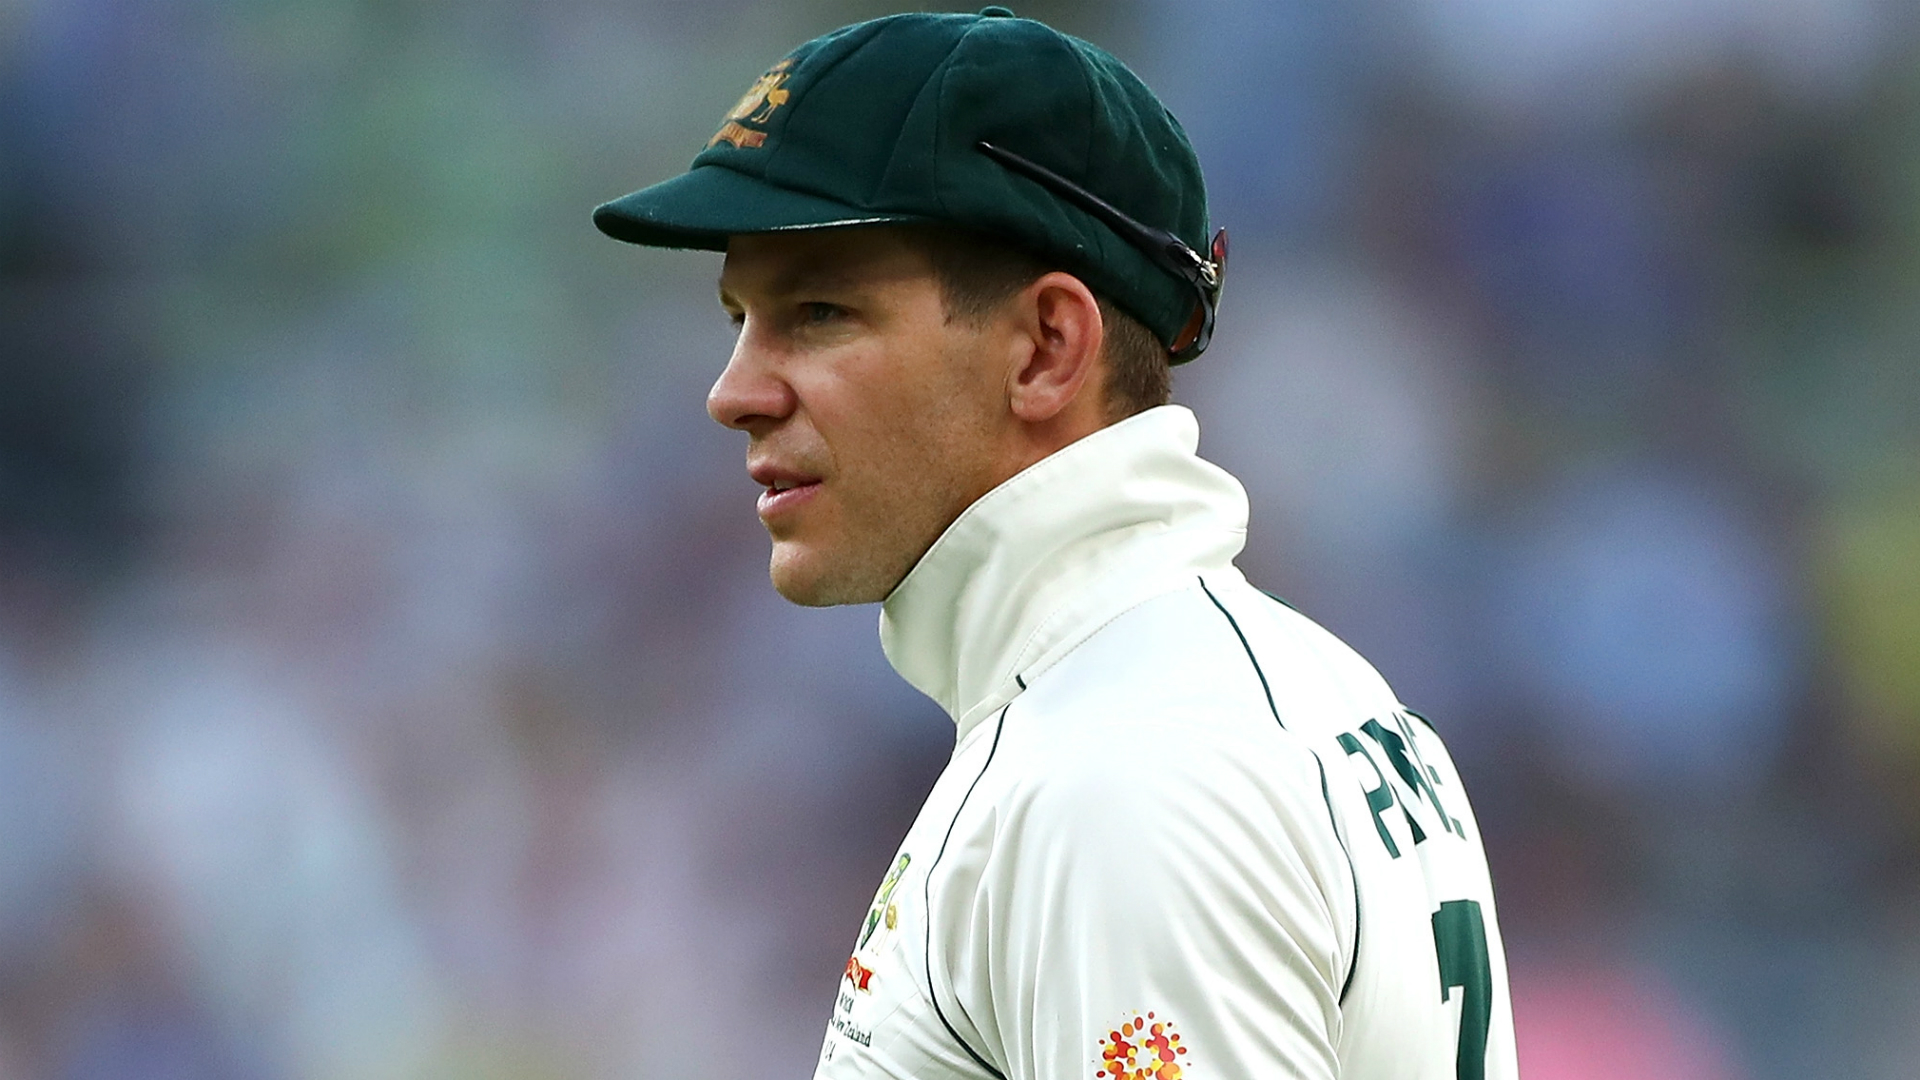 Australia Test captain Tim Paine has opened up on the mental health struggles he has had to contend with in his career.